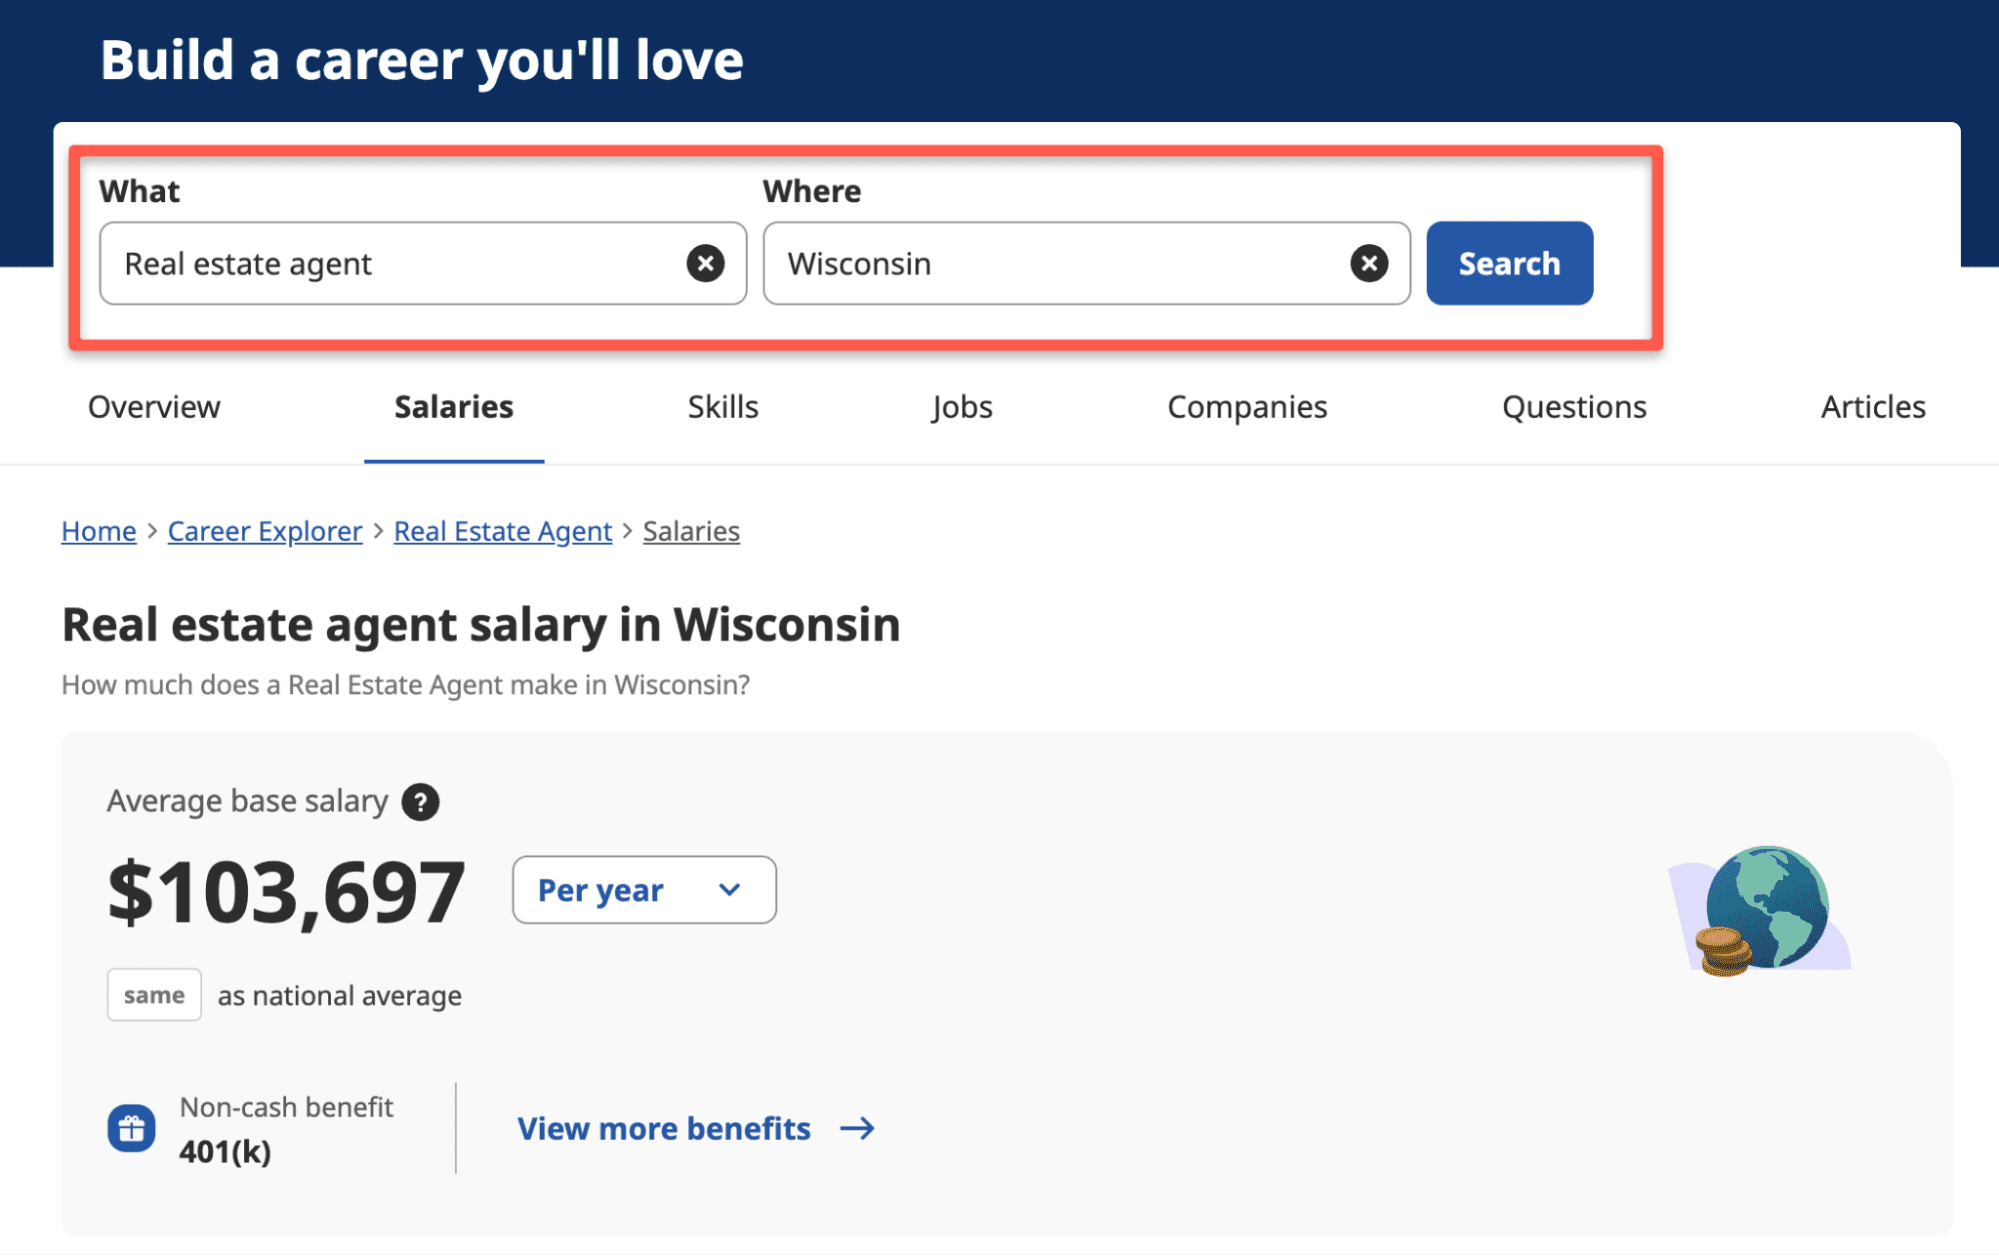 Salary information for real estate agents in Wisconsin.